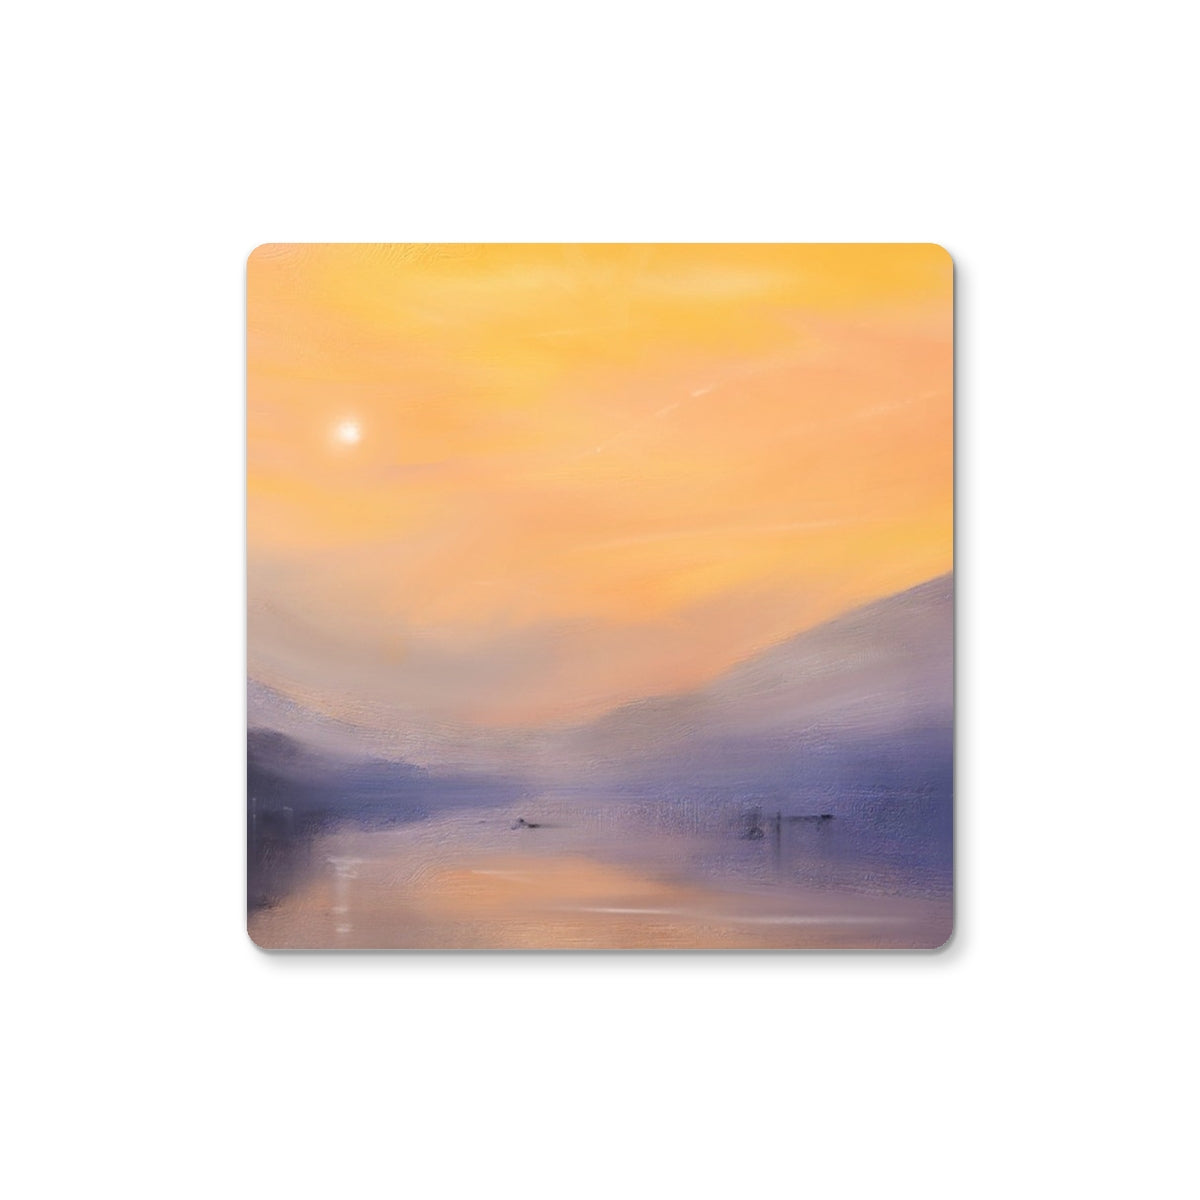 Loch Eck Dusk Art Gifts Coaster-Coasters-Scottish Lochs & Mountains Art Gallery-2 Coasters-Paintings, Prints, Homeware, Art Gifts From Scotland By Scottish Artist Kevin Hunter